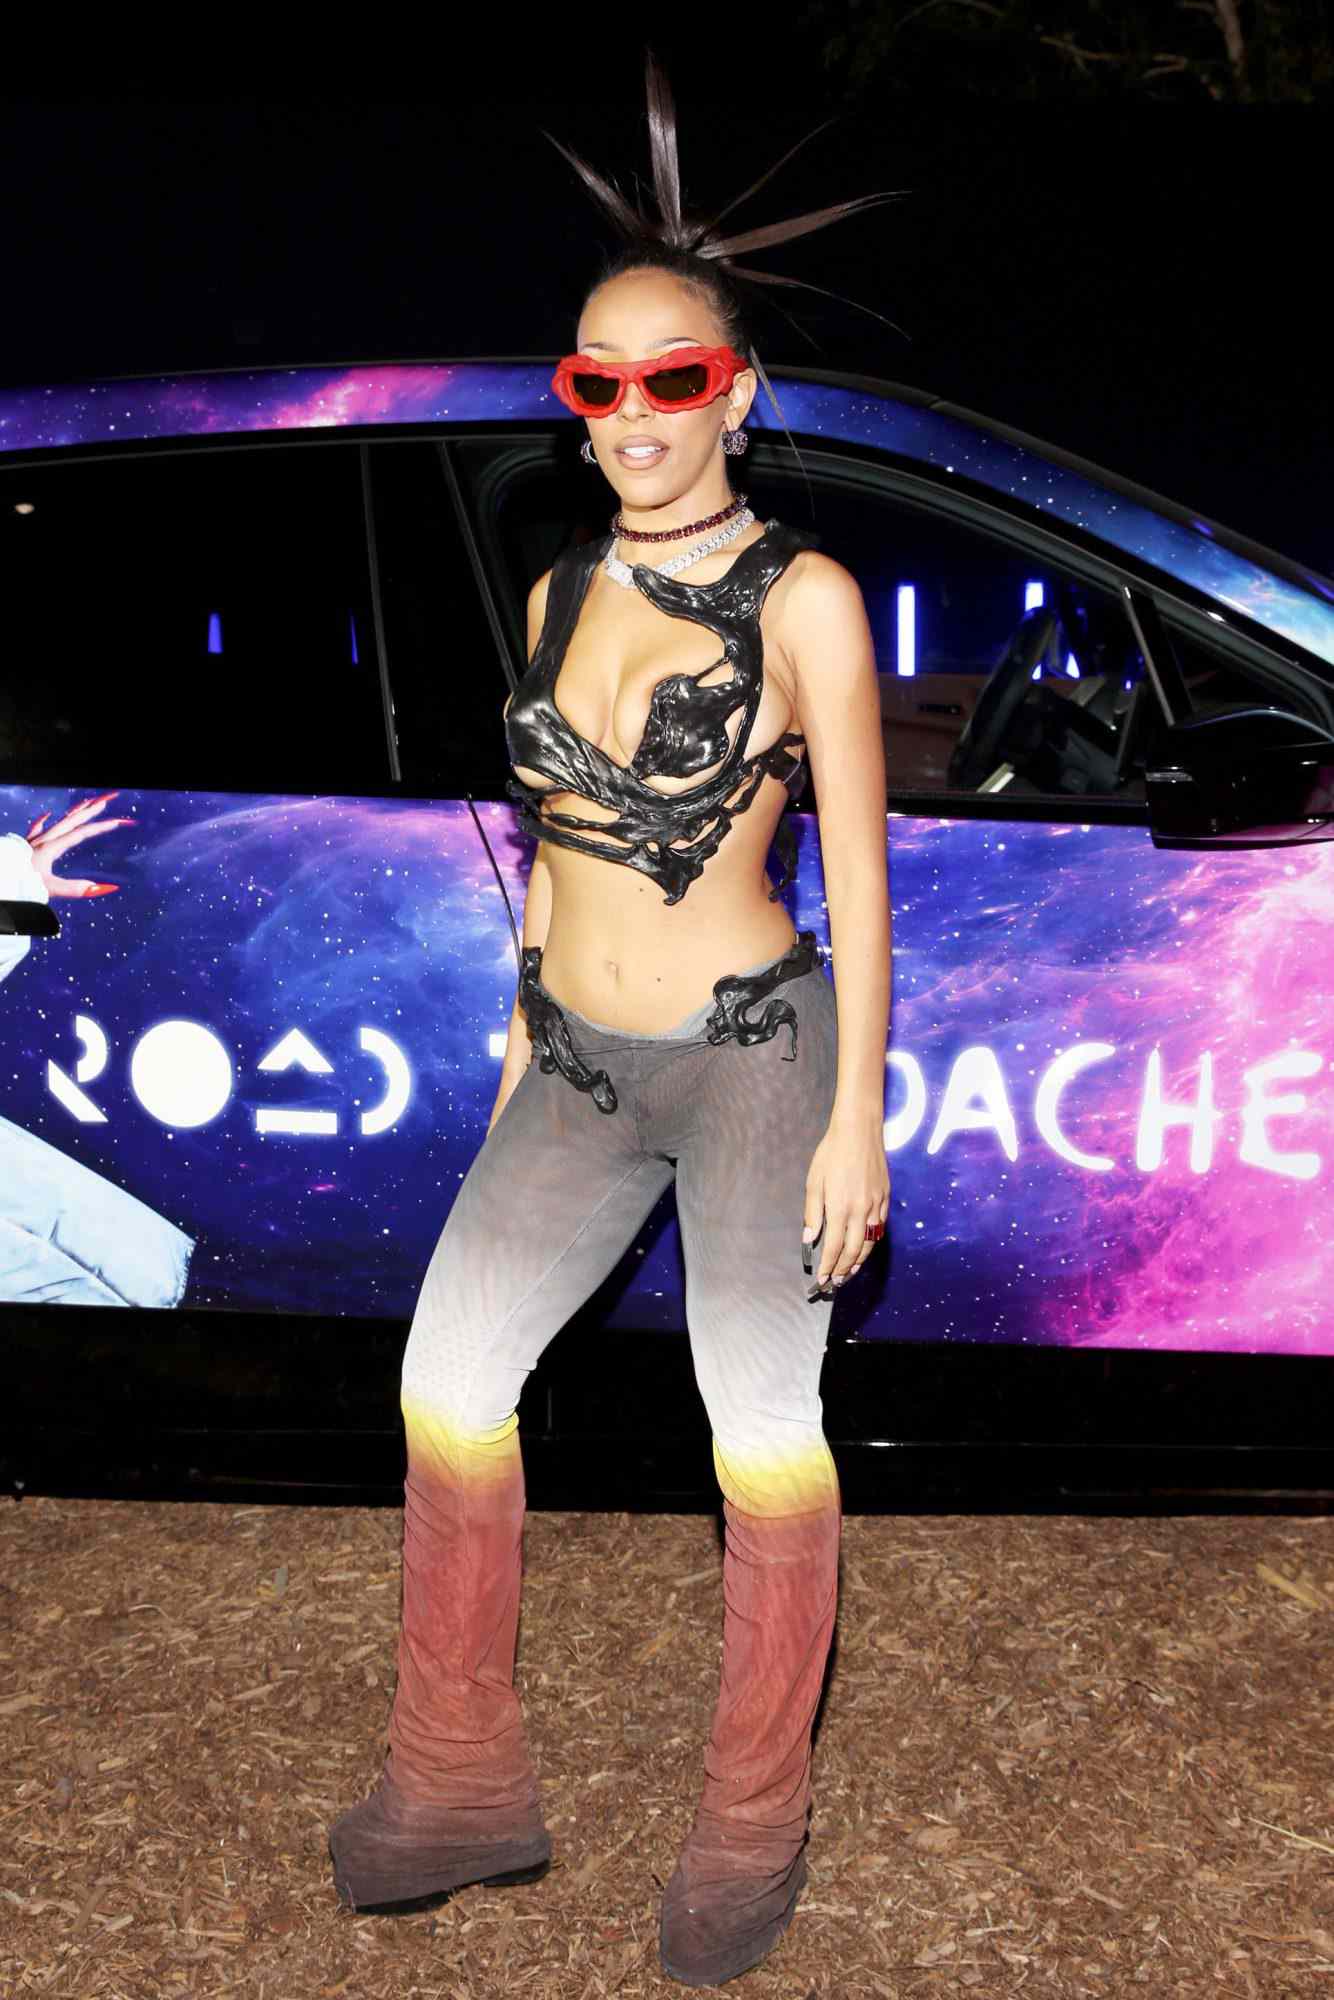 COACHELLA, CALIFORNIA - APRIL 15: (EDITORS NOTE: Image contains partial nudity.) Doja Cat attends the Swedish House Mafia “Paradise Again” Album Release Party with Spotify Live from the Desert at Zenyara on April 15, 2022 in Coachella, California. (Photo by Jesse Grant/Getty Images for Spotify)